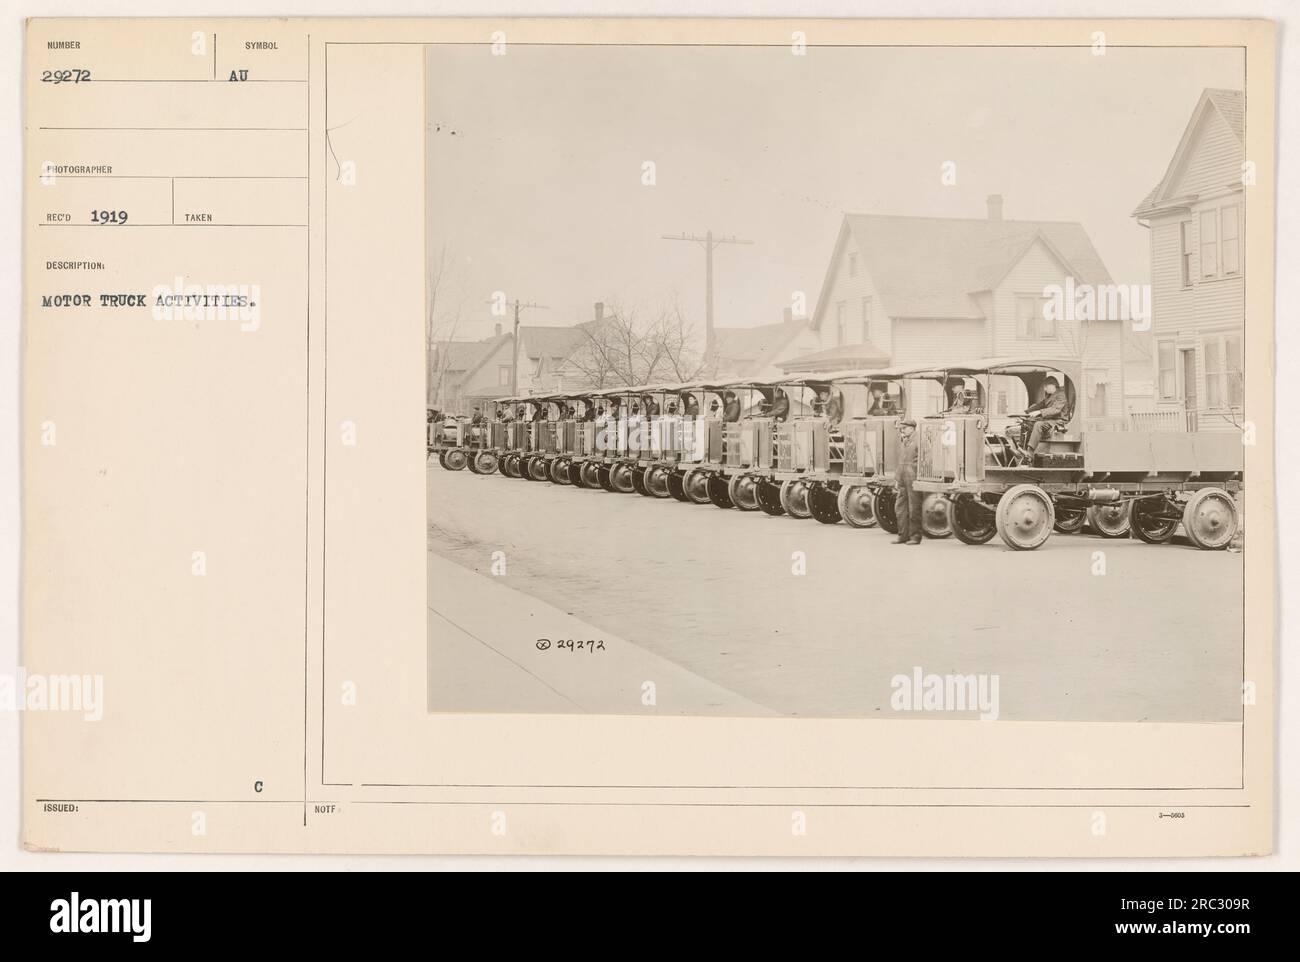 American soldiers driving motor trucks during World War I. The soldiers are engaged in transportation activities, moving equipment and supplies on the battlefield. The photo was taken in 1919, capturing the symbol of the American military's motor transport activities during that time. Stock Photo